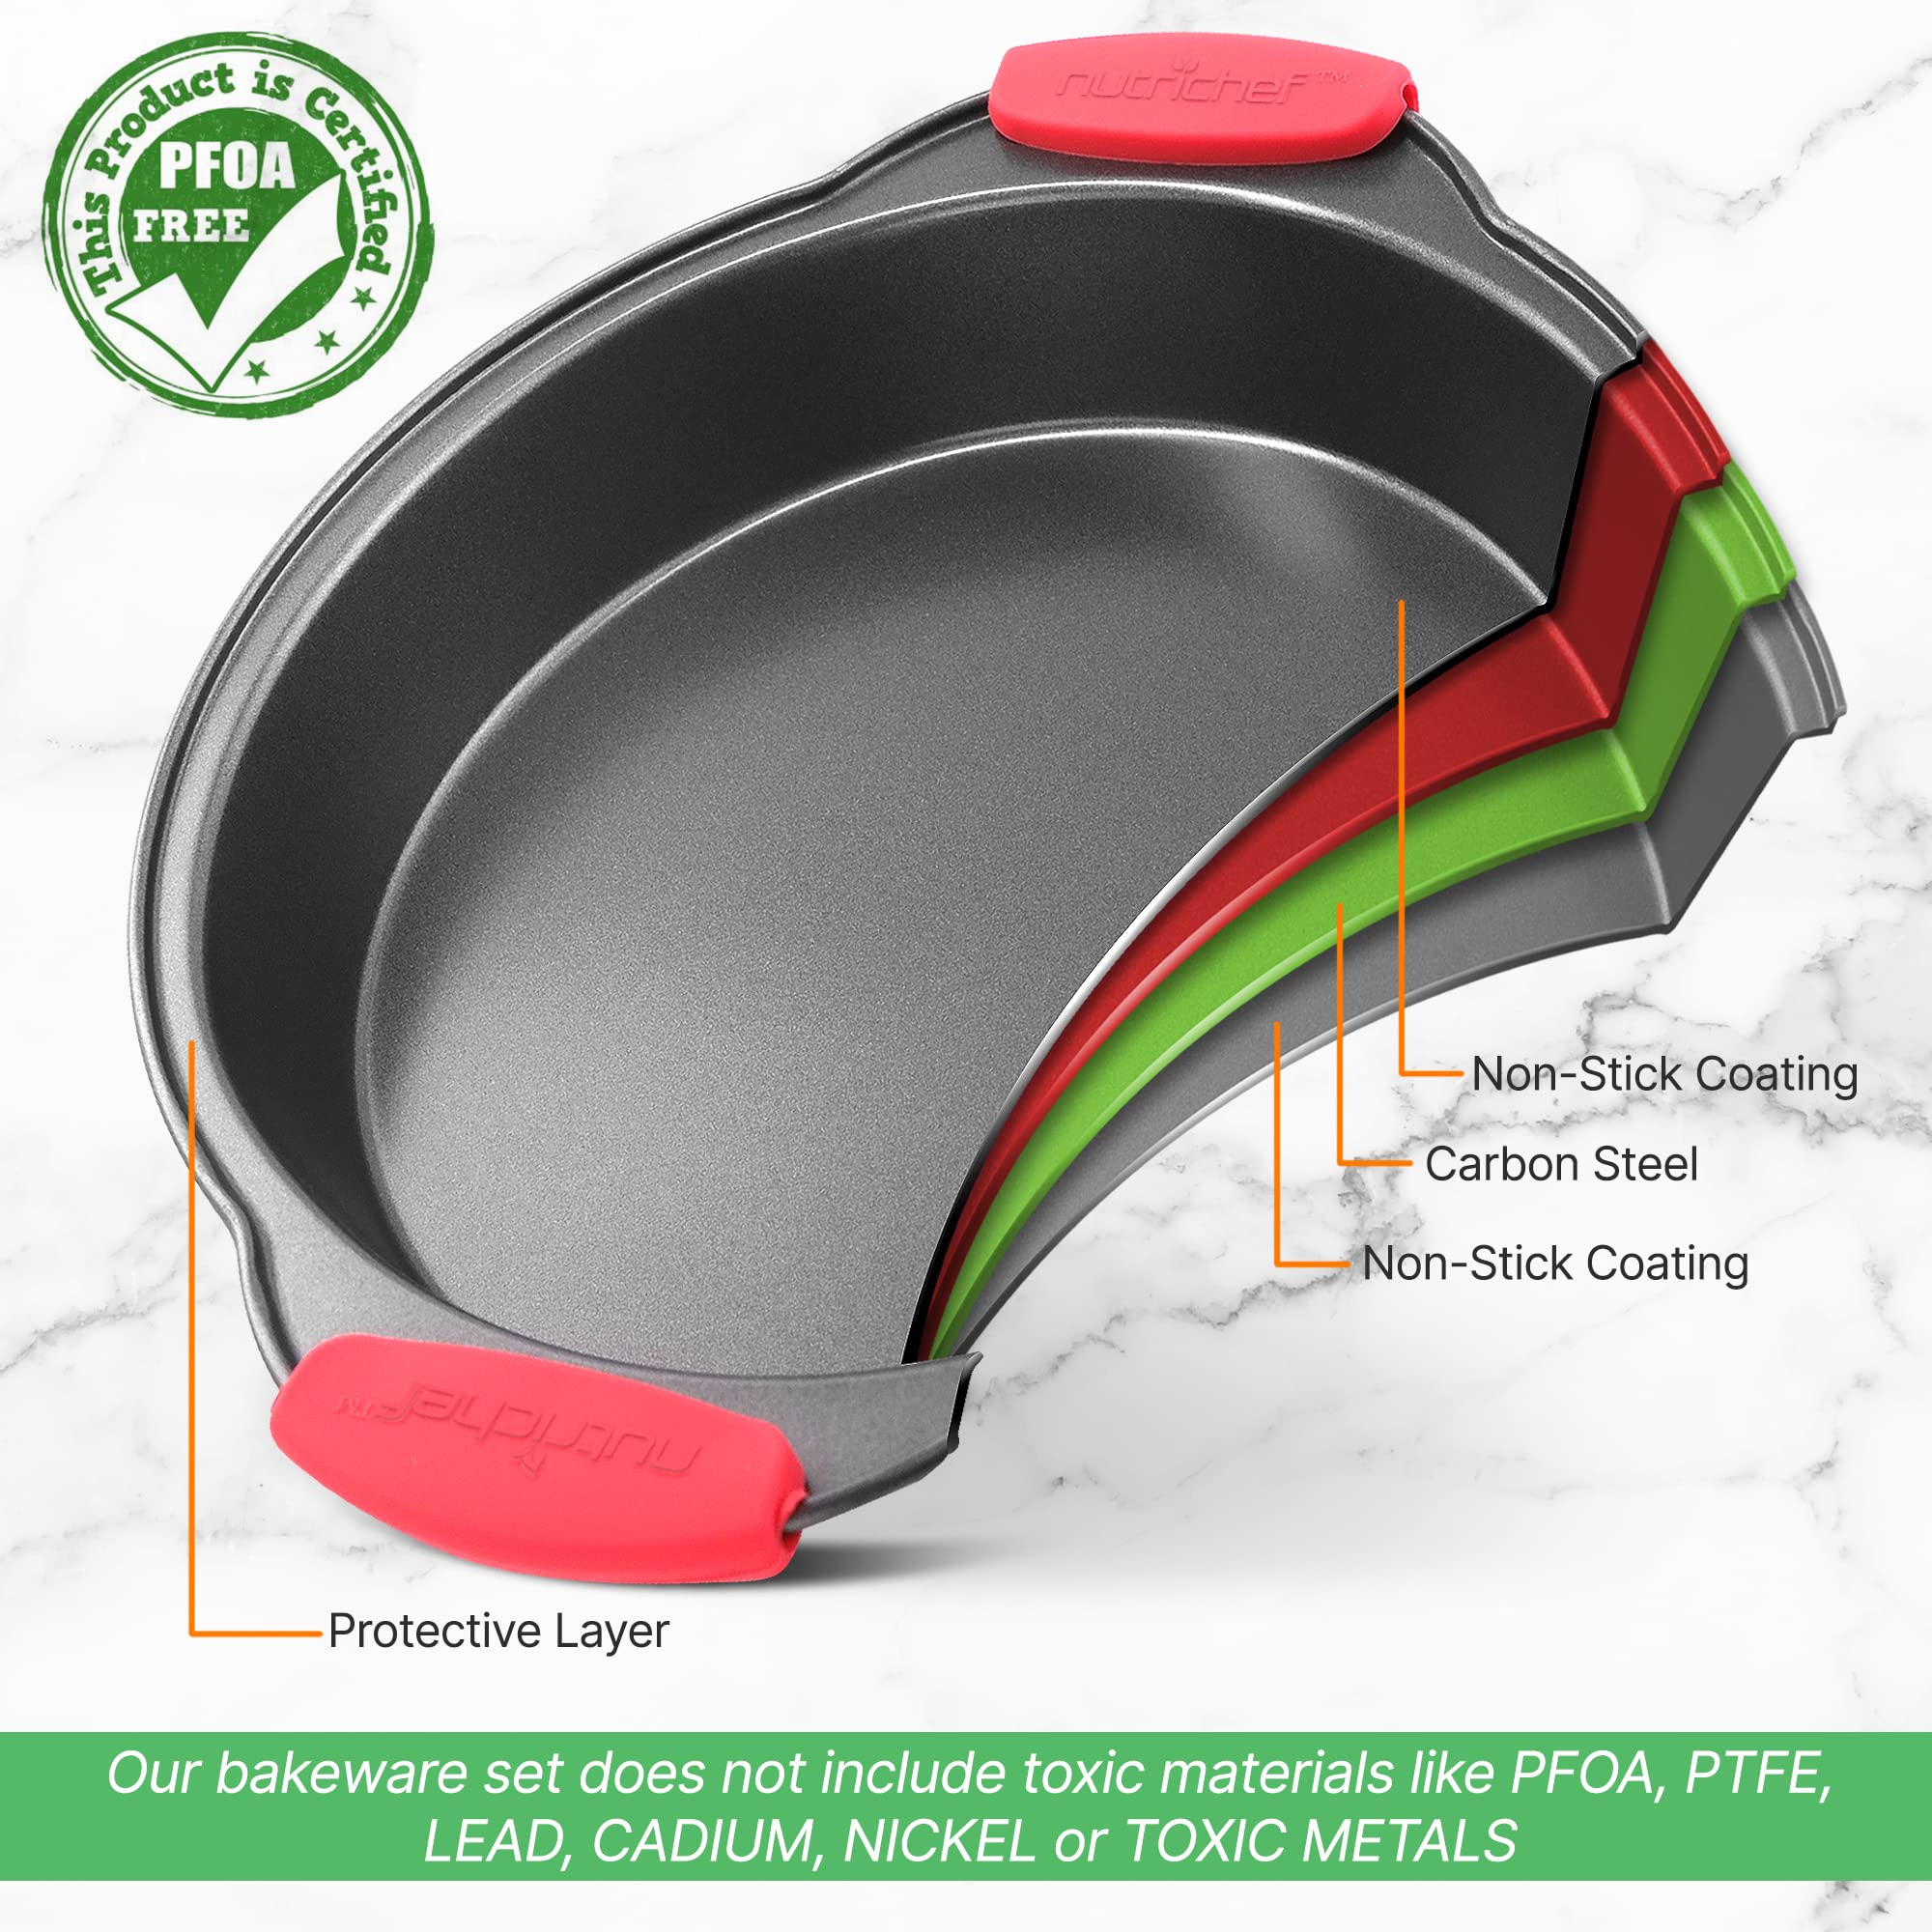 Non Stick Cake Round Pan, Deluxe Gray Carbon Steel Pan with Red Silicone Handles, Quality Metal Bakeware For Cooking & Baking Cake Loaf, Muffins & More, Compatible with Model NCSBS10S